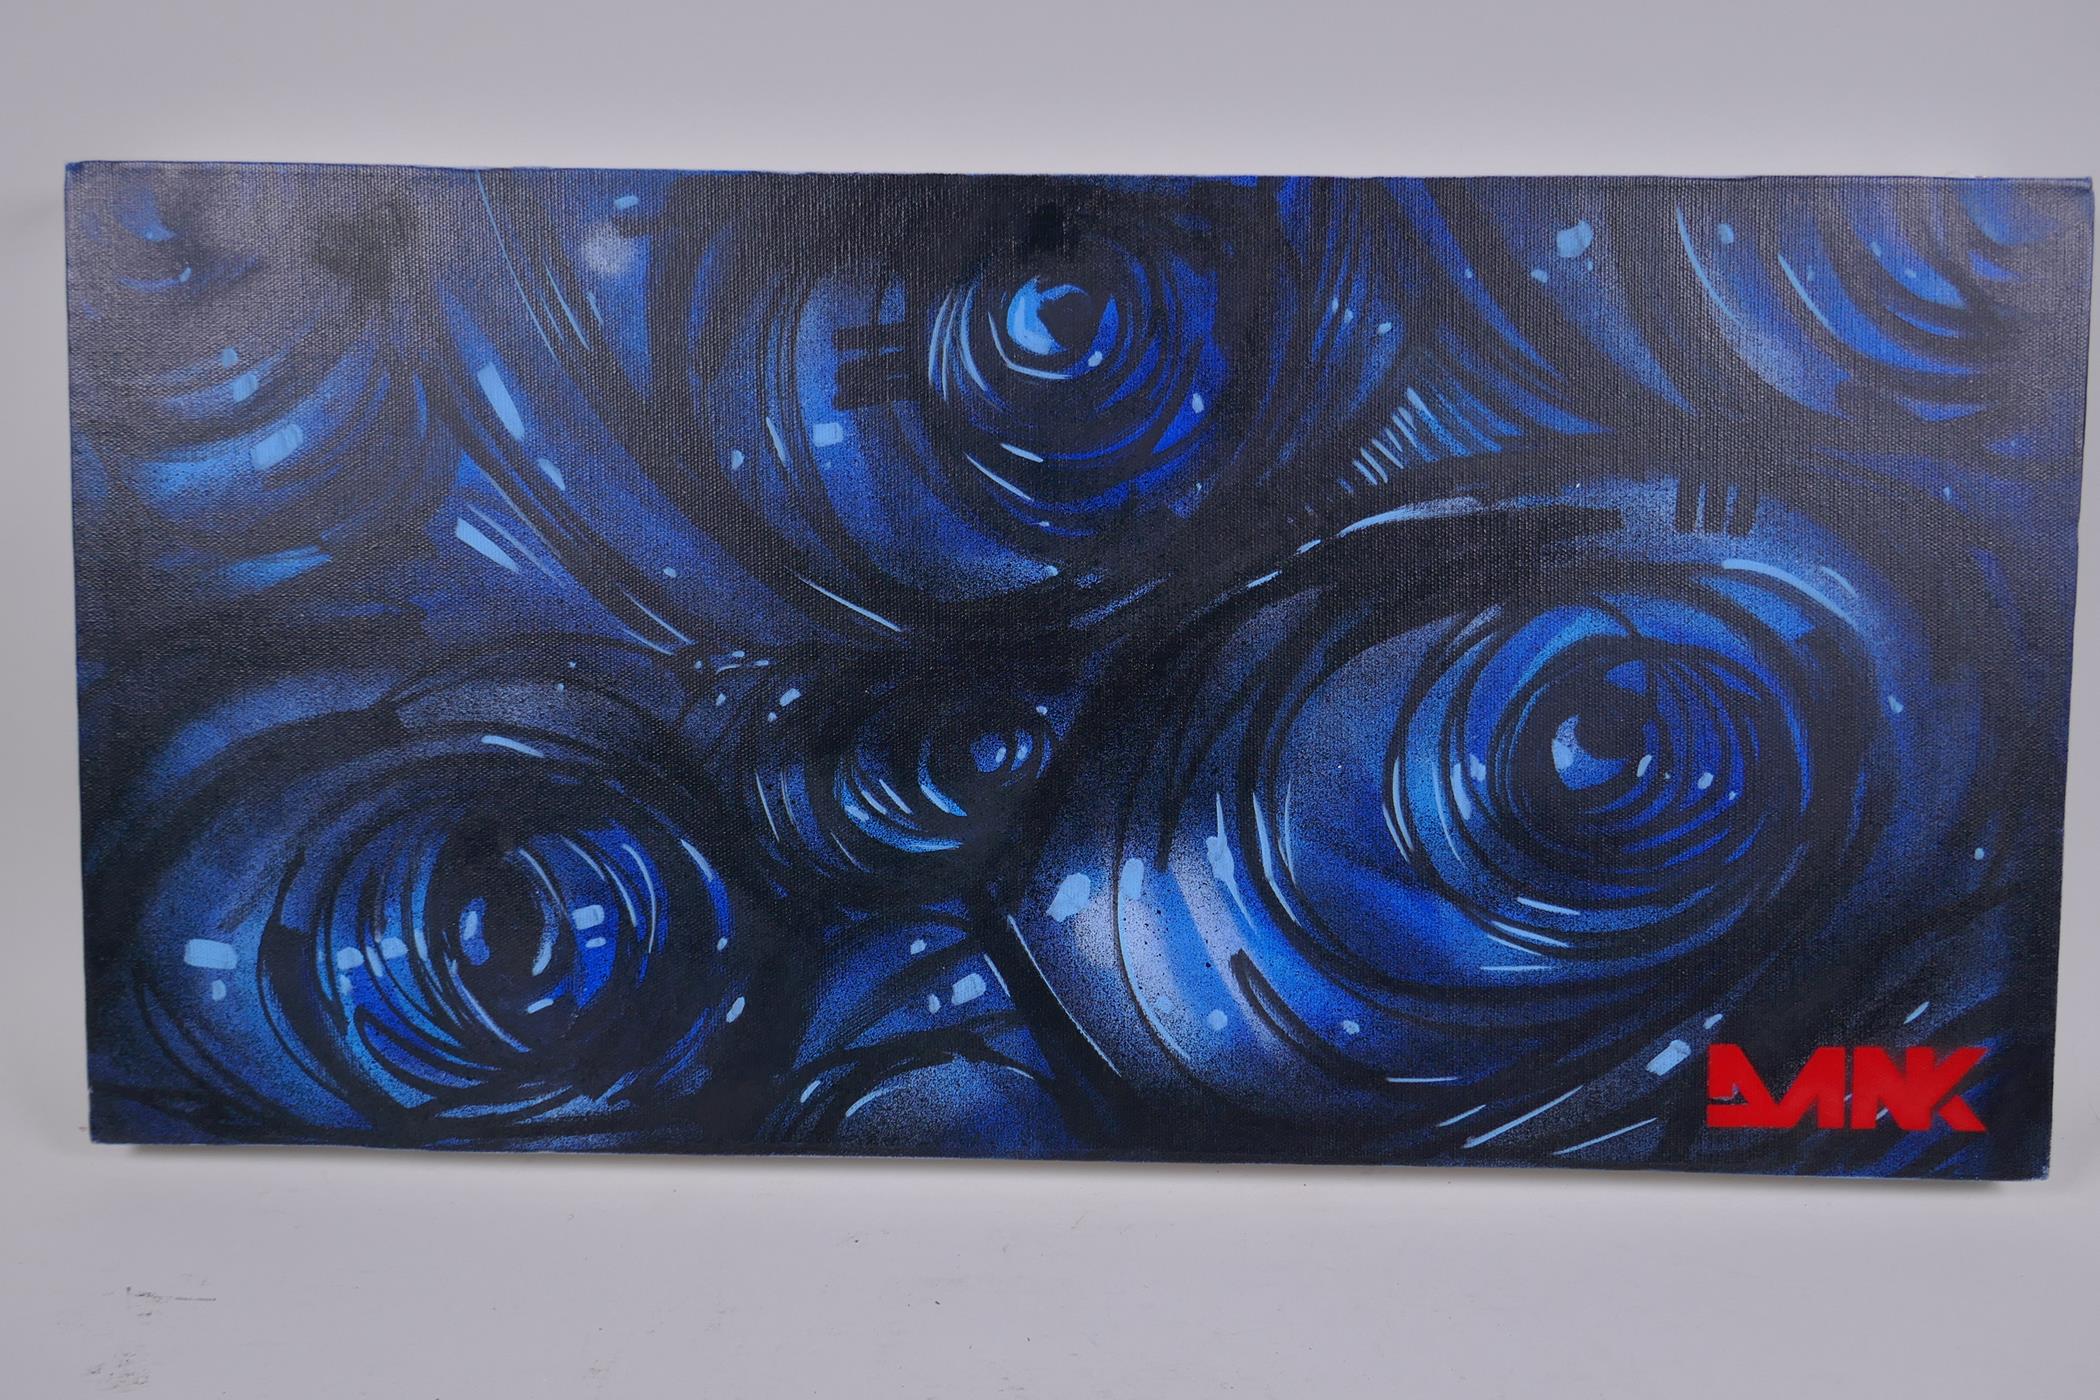 DMK, graffiti abstract on canvas, 61 x 30cm - Image 2 of 4